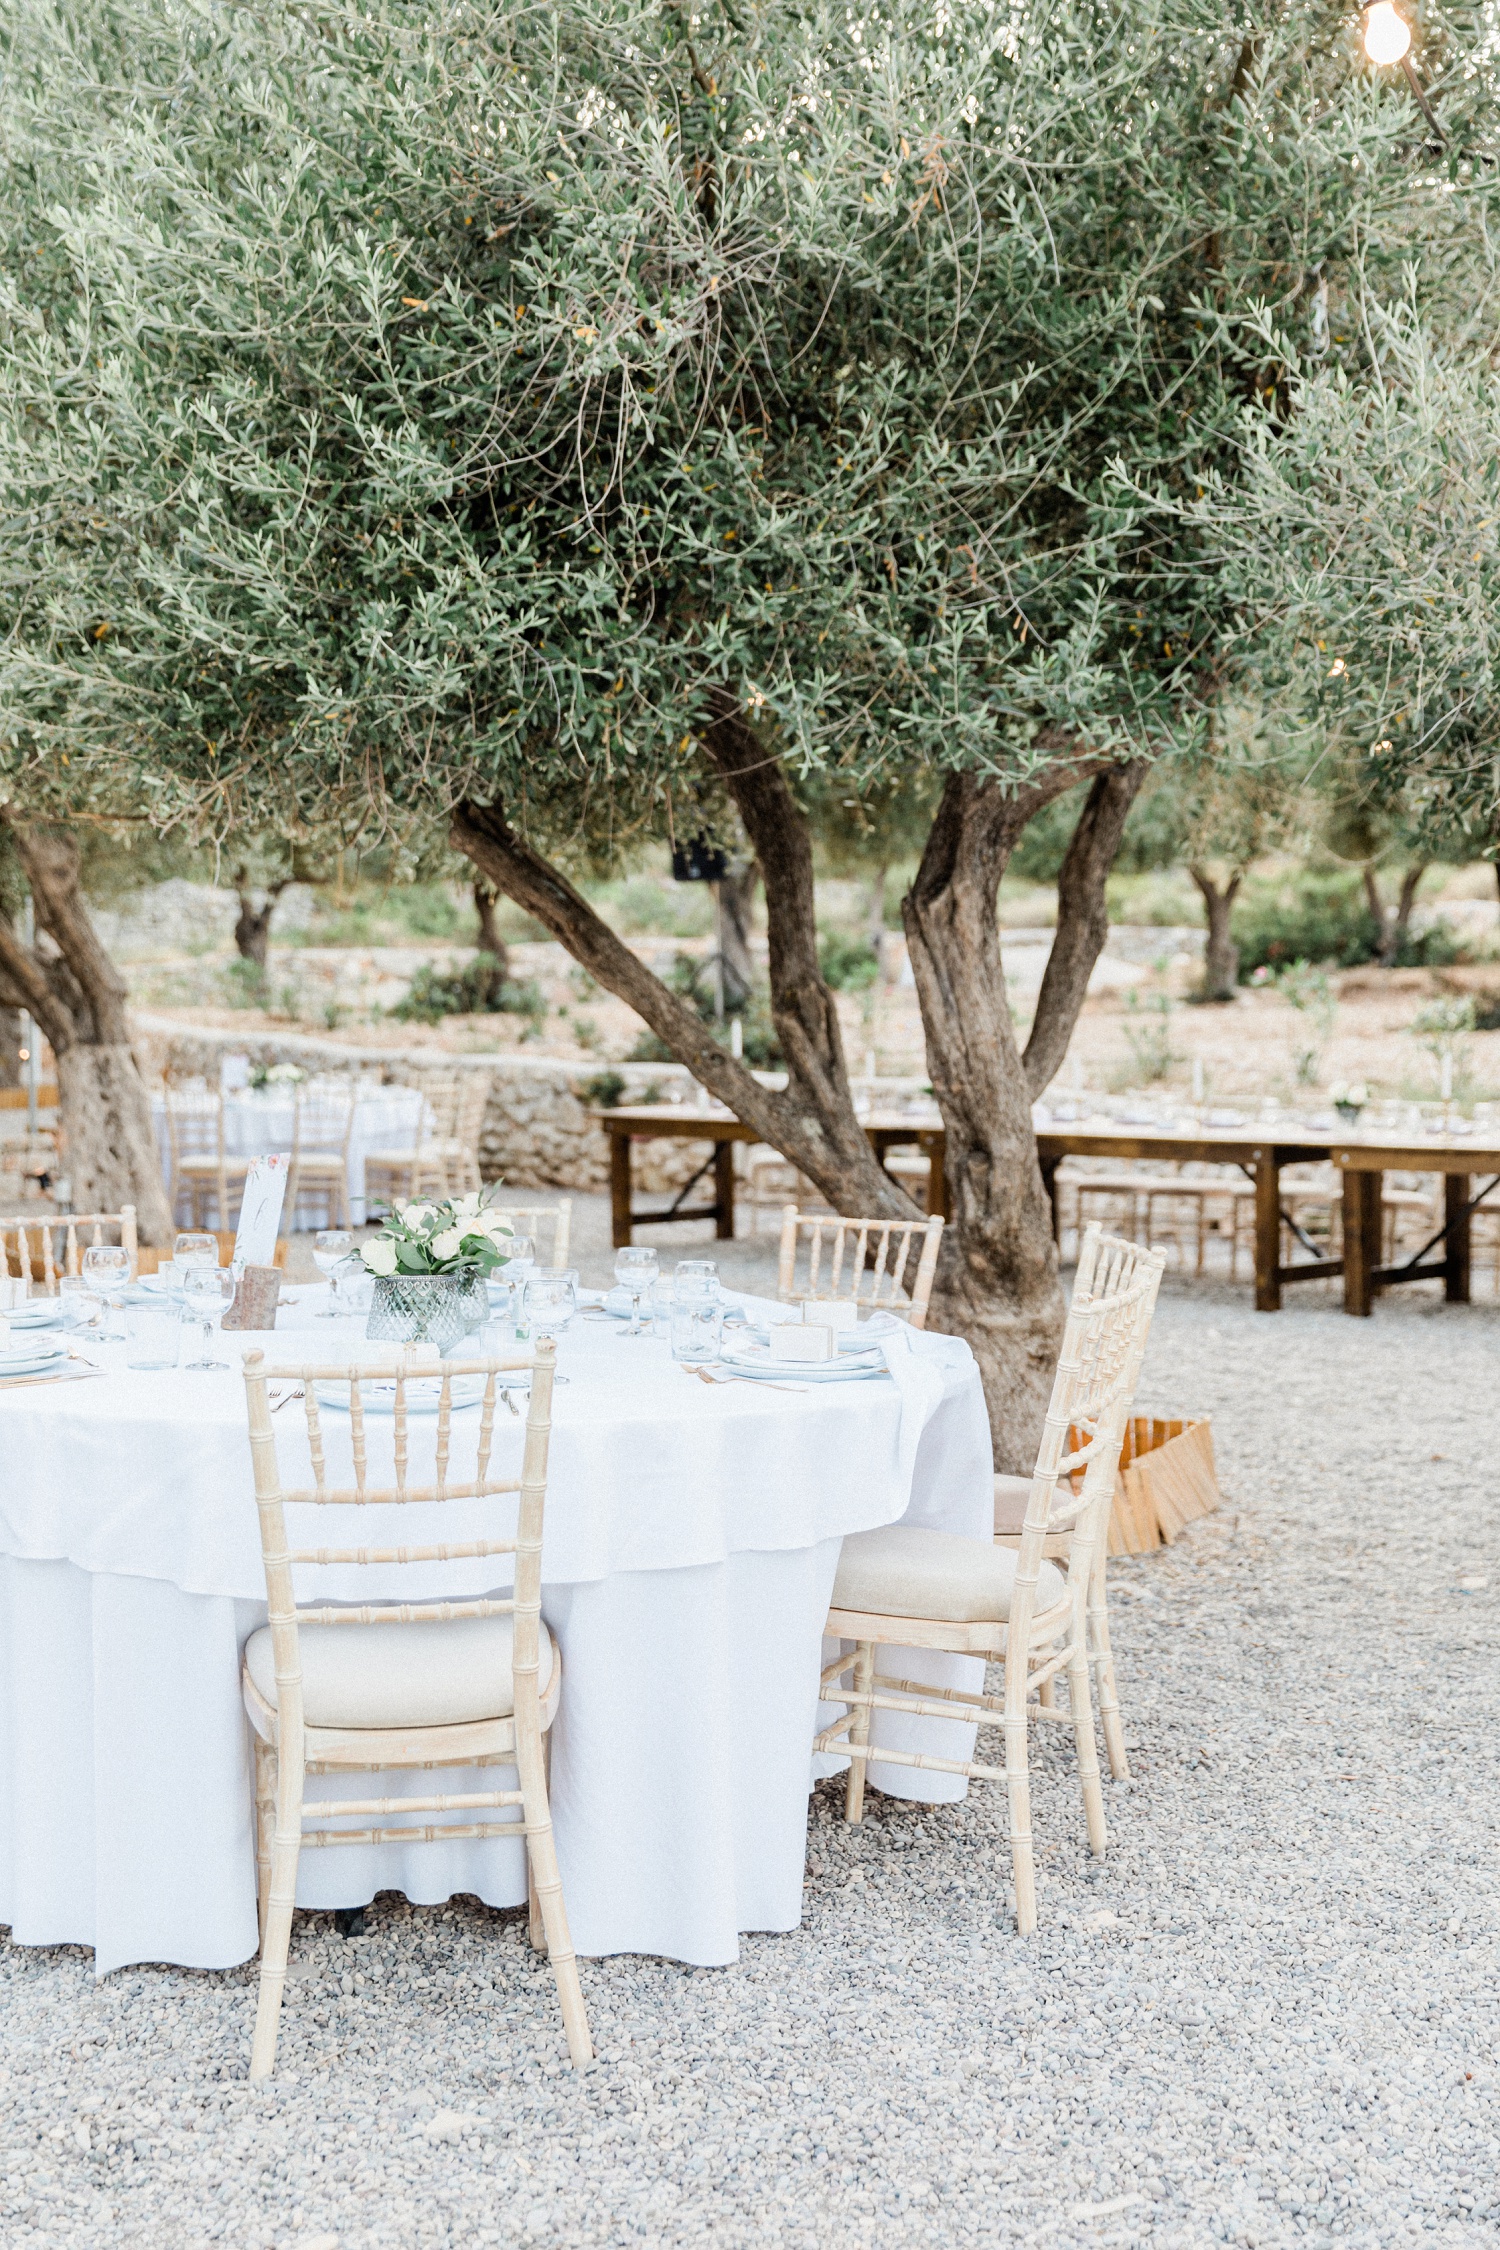 Tables with white and green centrepieces in an olive grove wedding venue on Ithaca